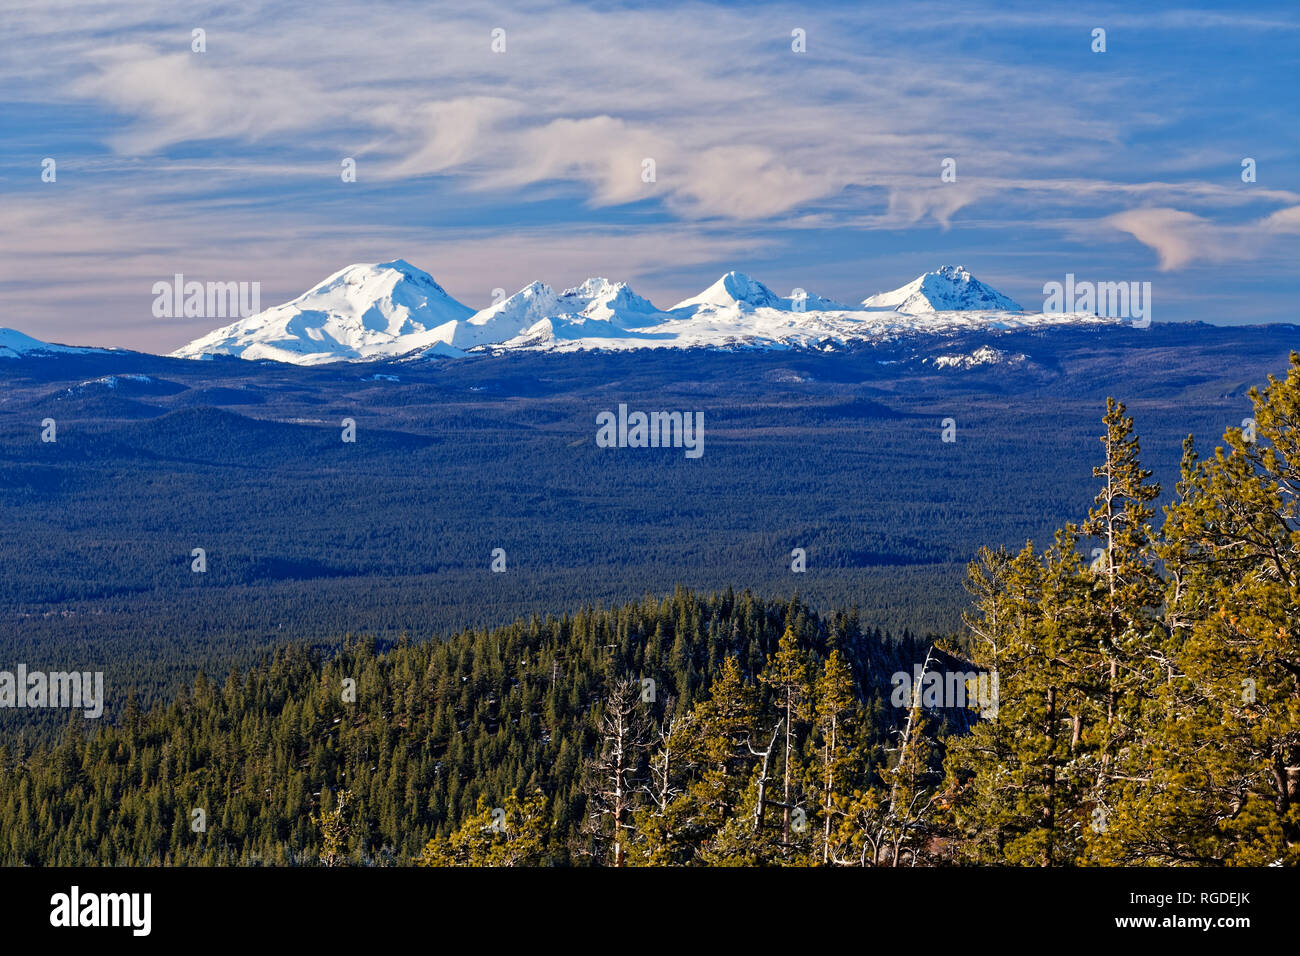 41,987.07188 South Middle North Sisters & Broken Top Mts, distant snowy Cascade Mountains (3 Three Sisters), pines conifer trees forest landscape Stock Photo